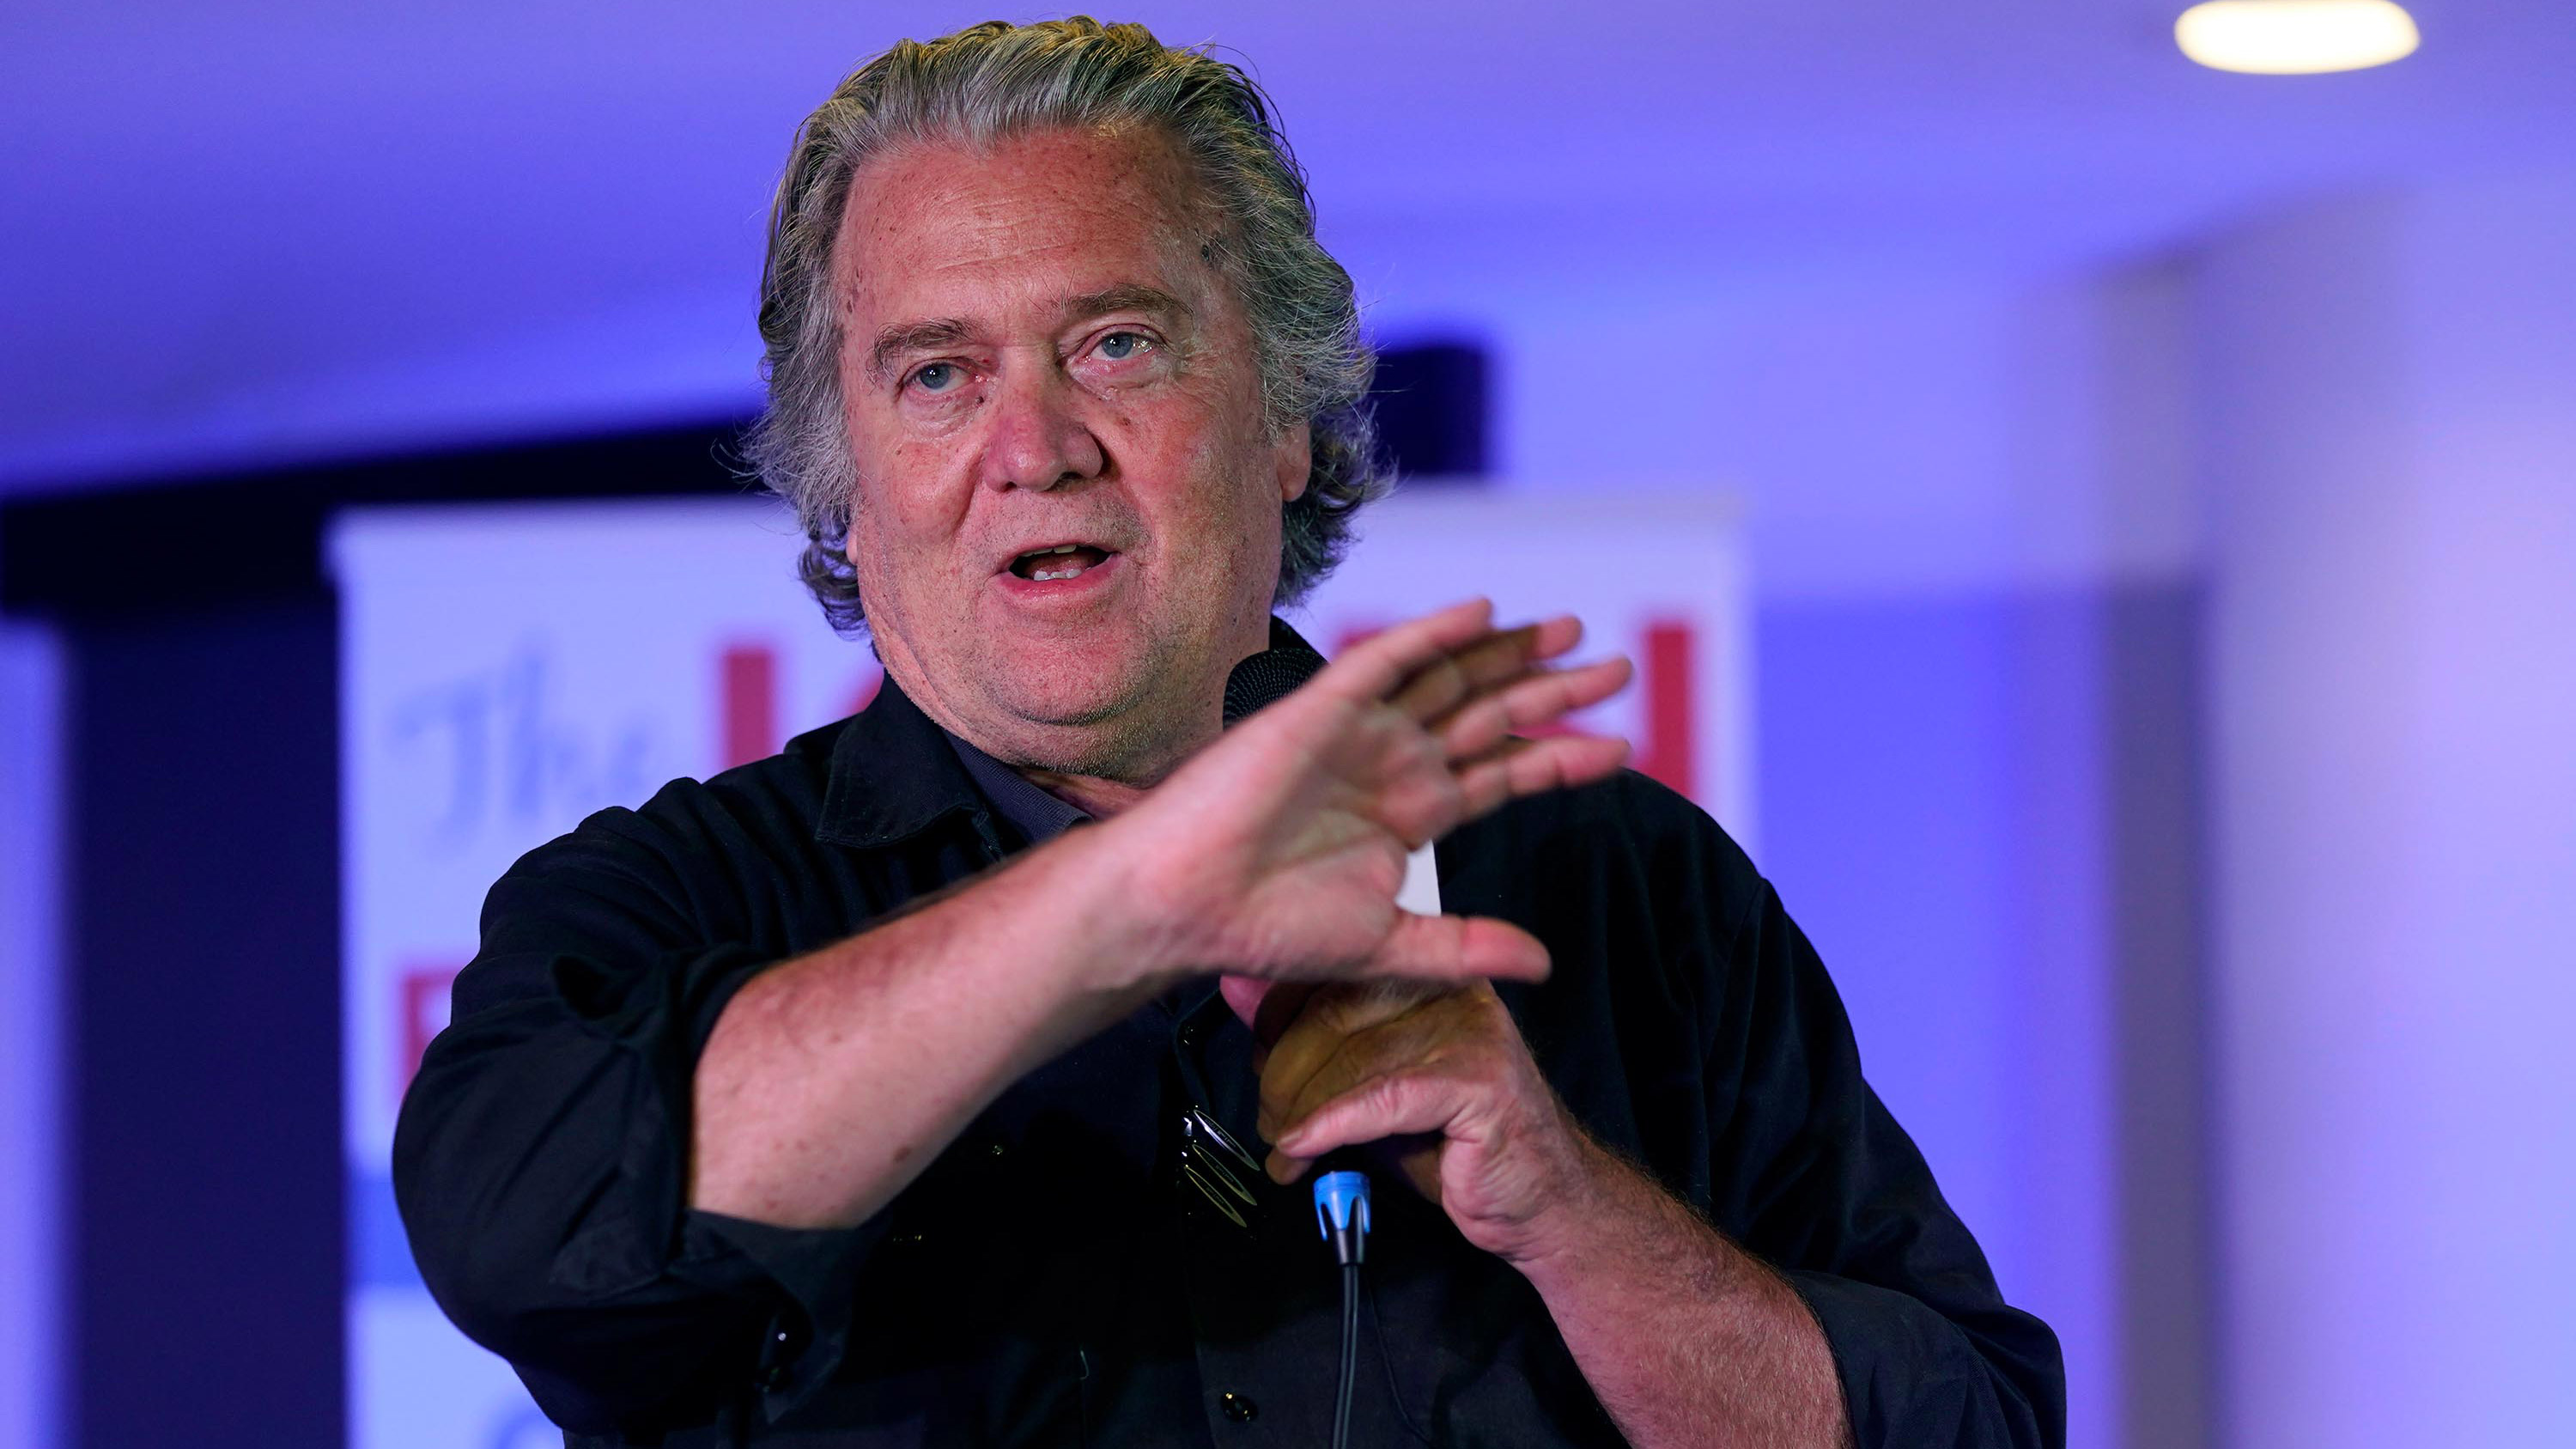 Steve Bannon speaks during an election rally in Richmond, Virginia, on October 13.